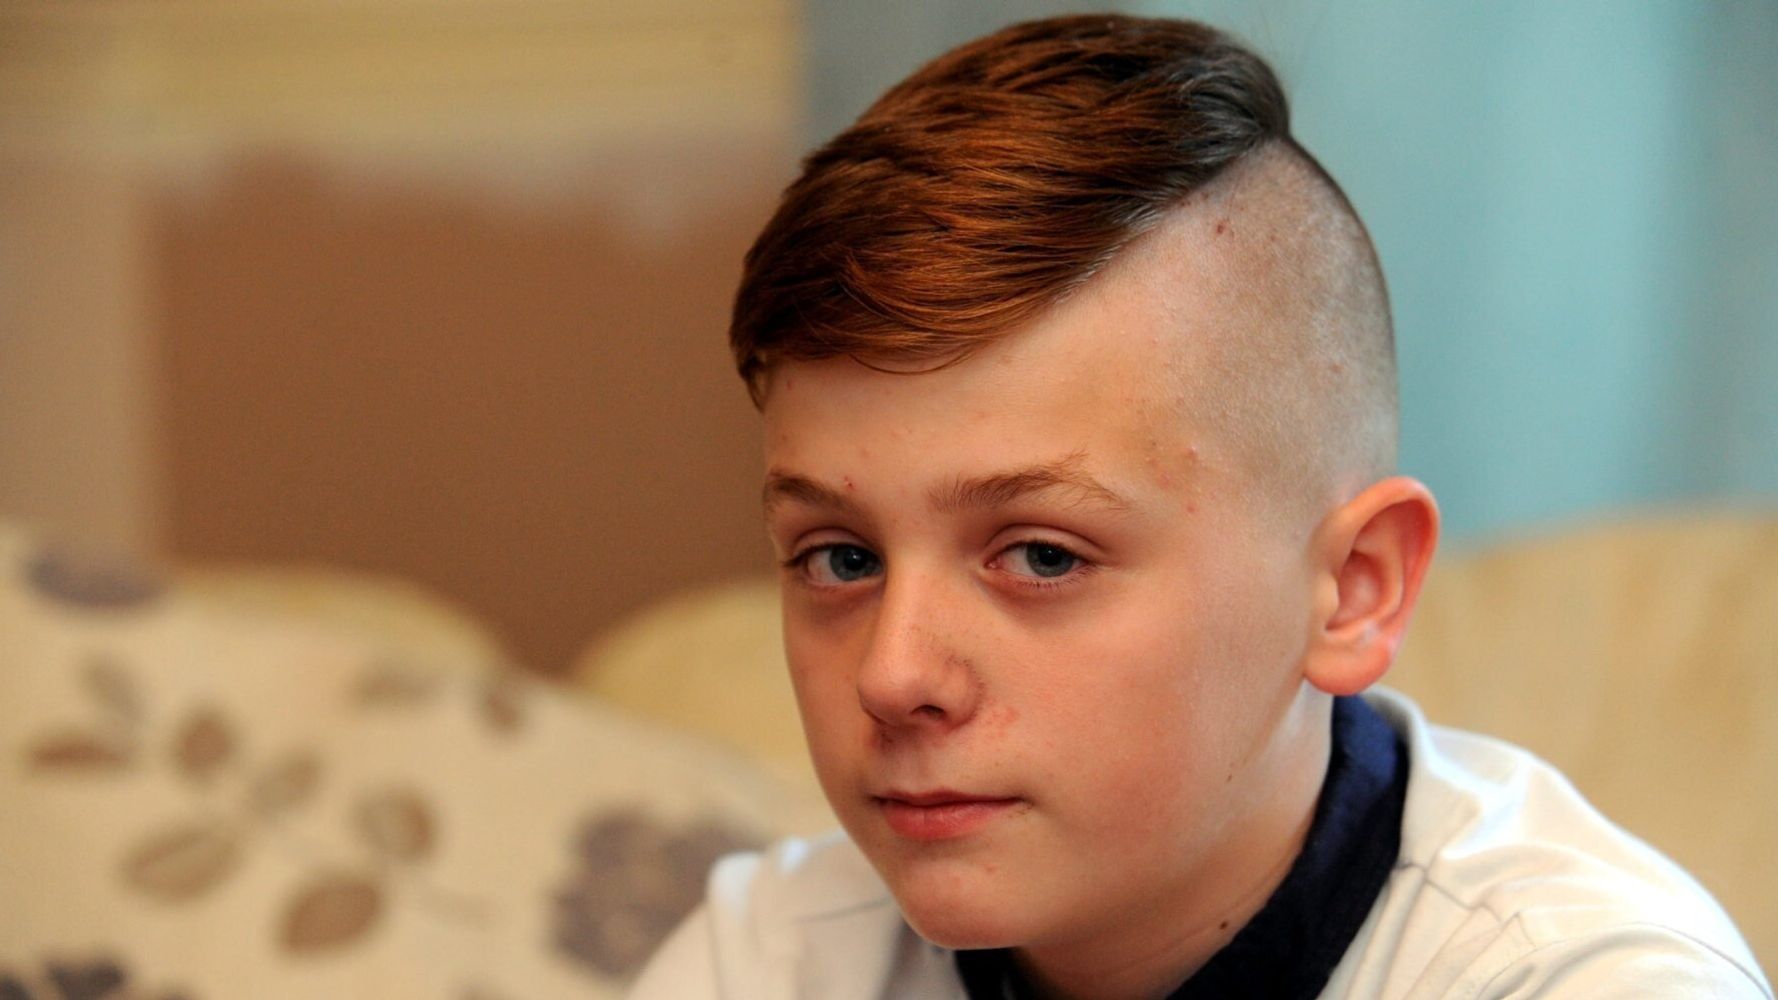 Boy Who Cut Hair Short For Sea Cadets Separated From Class At School Until  Hair Grows | HuffPost UK Parents